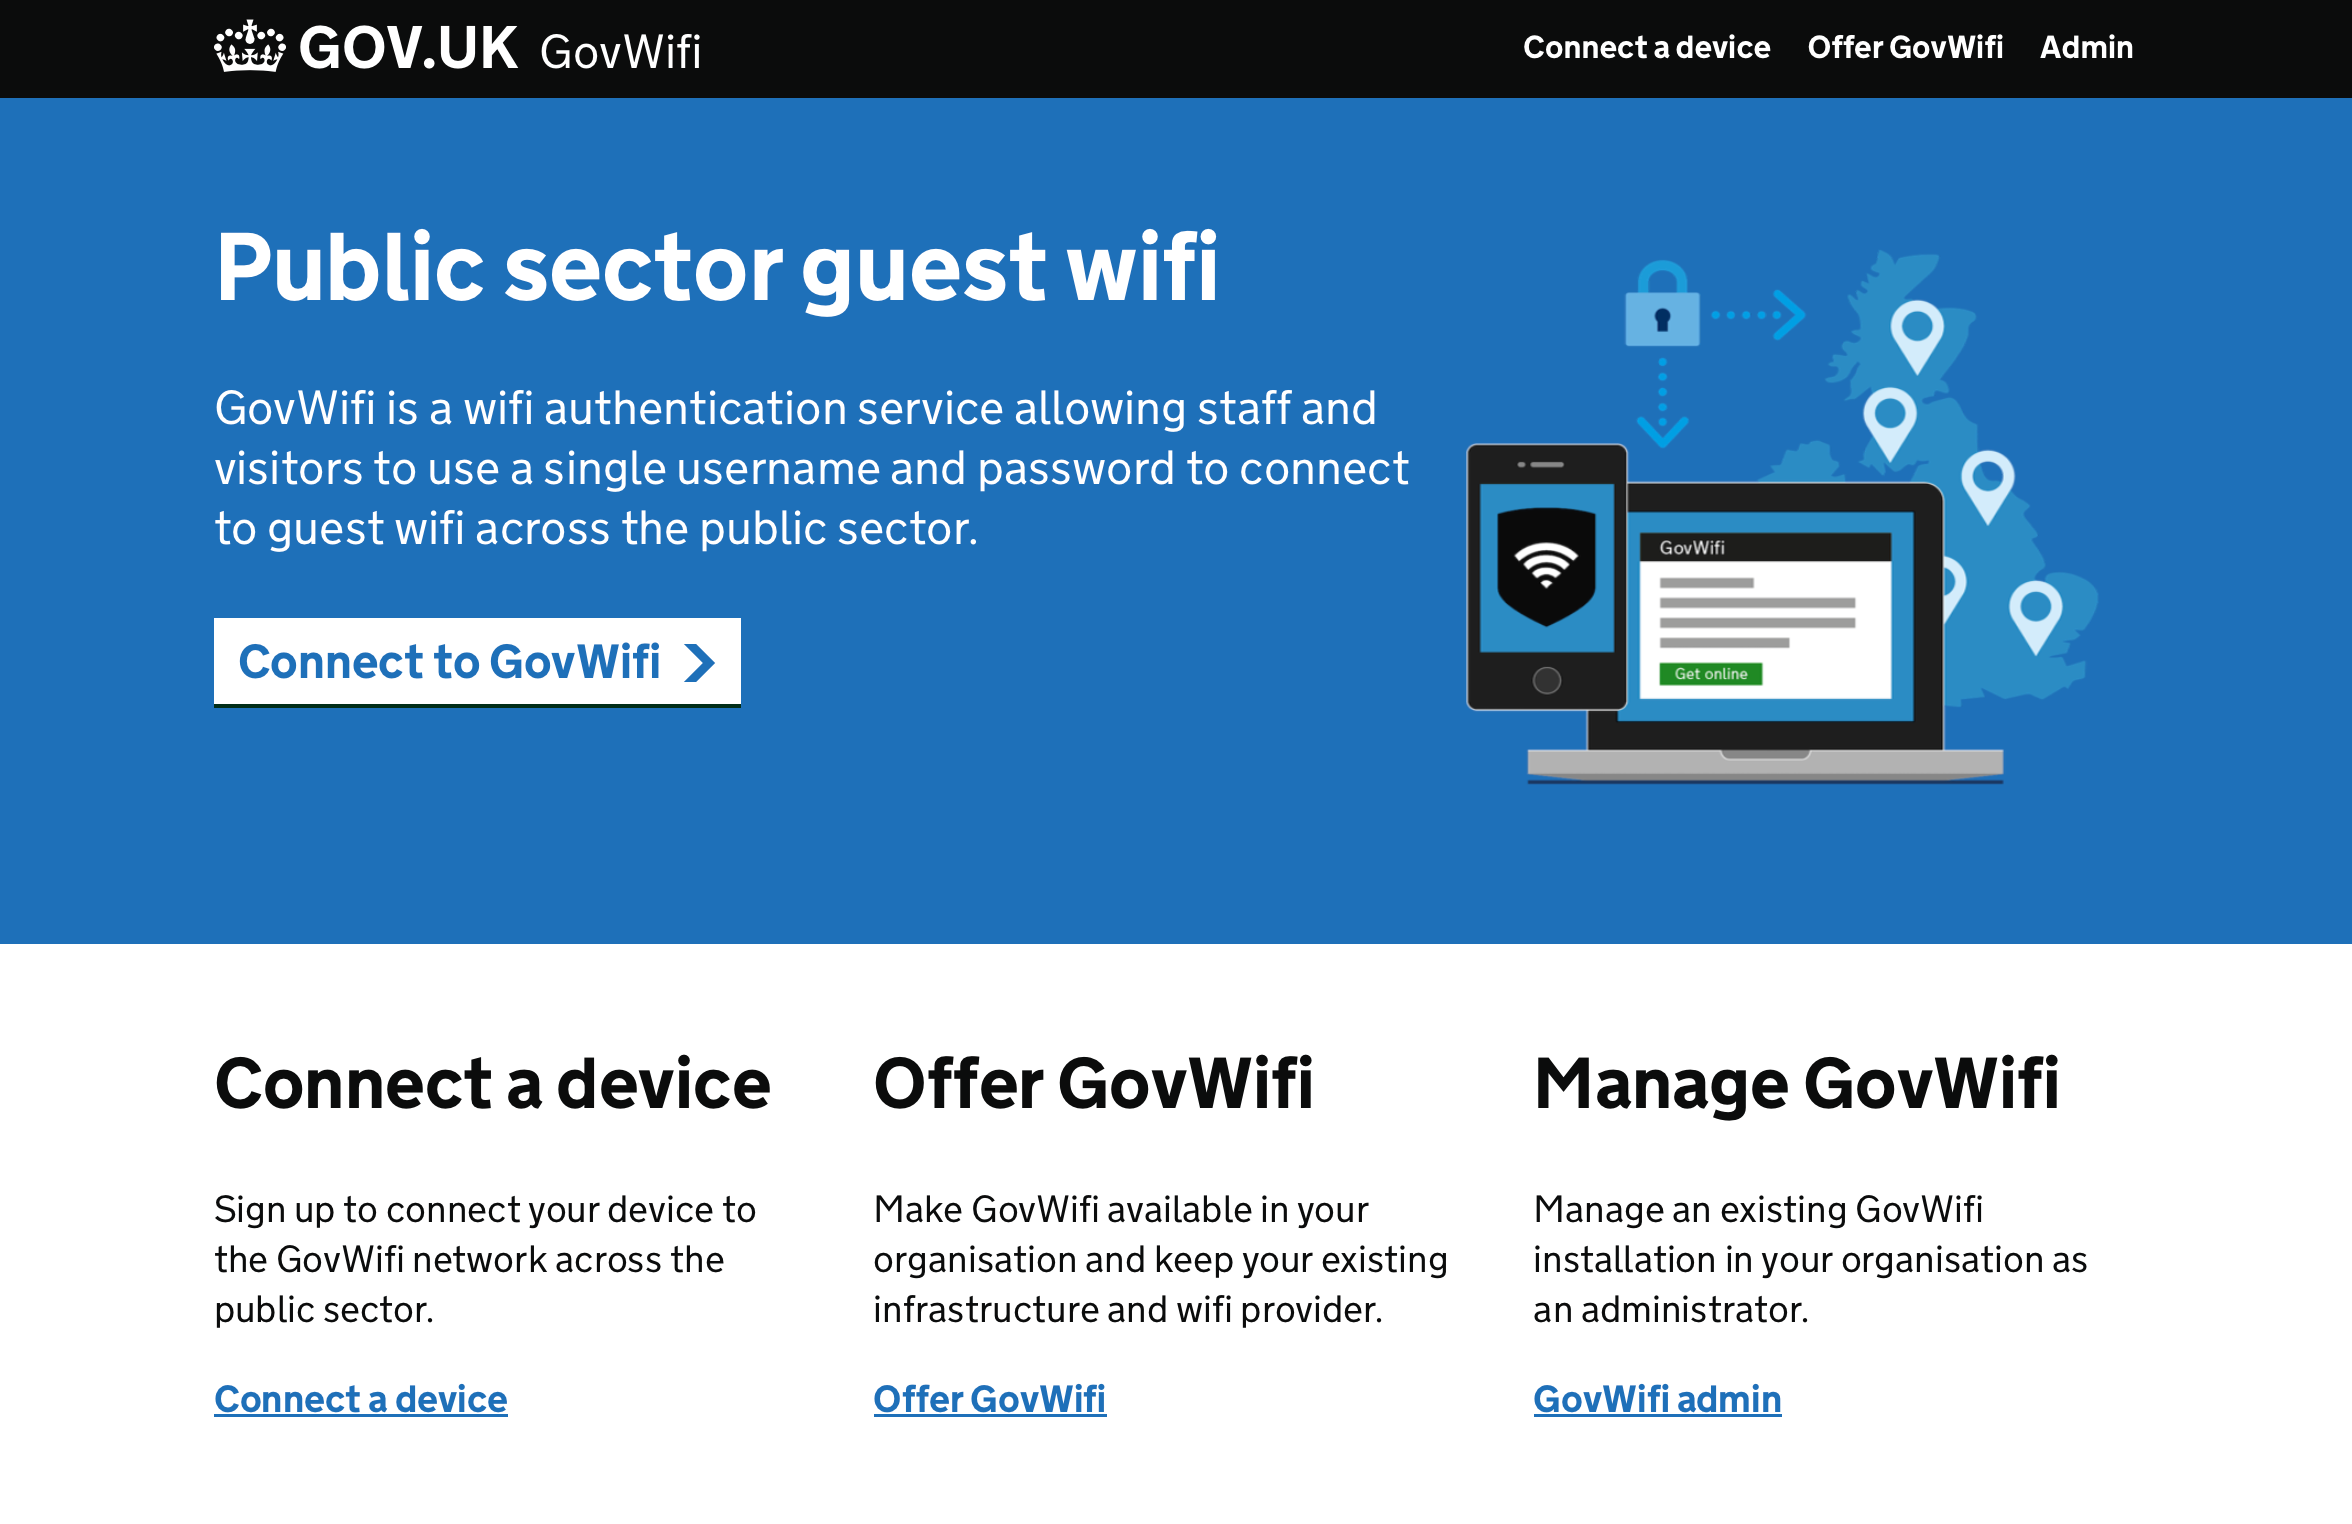 Screenshot. Public sector guest wifi. GovWifi is a wifi authentication service allowing staff and visitors to use a single username and password to connect to guest wifi across the public sector. Links for Connect a device, Offer GovWifi and Manage Govwifi.